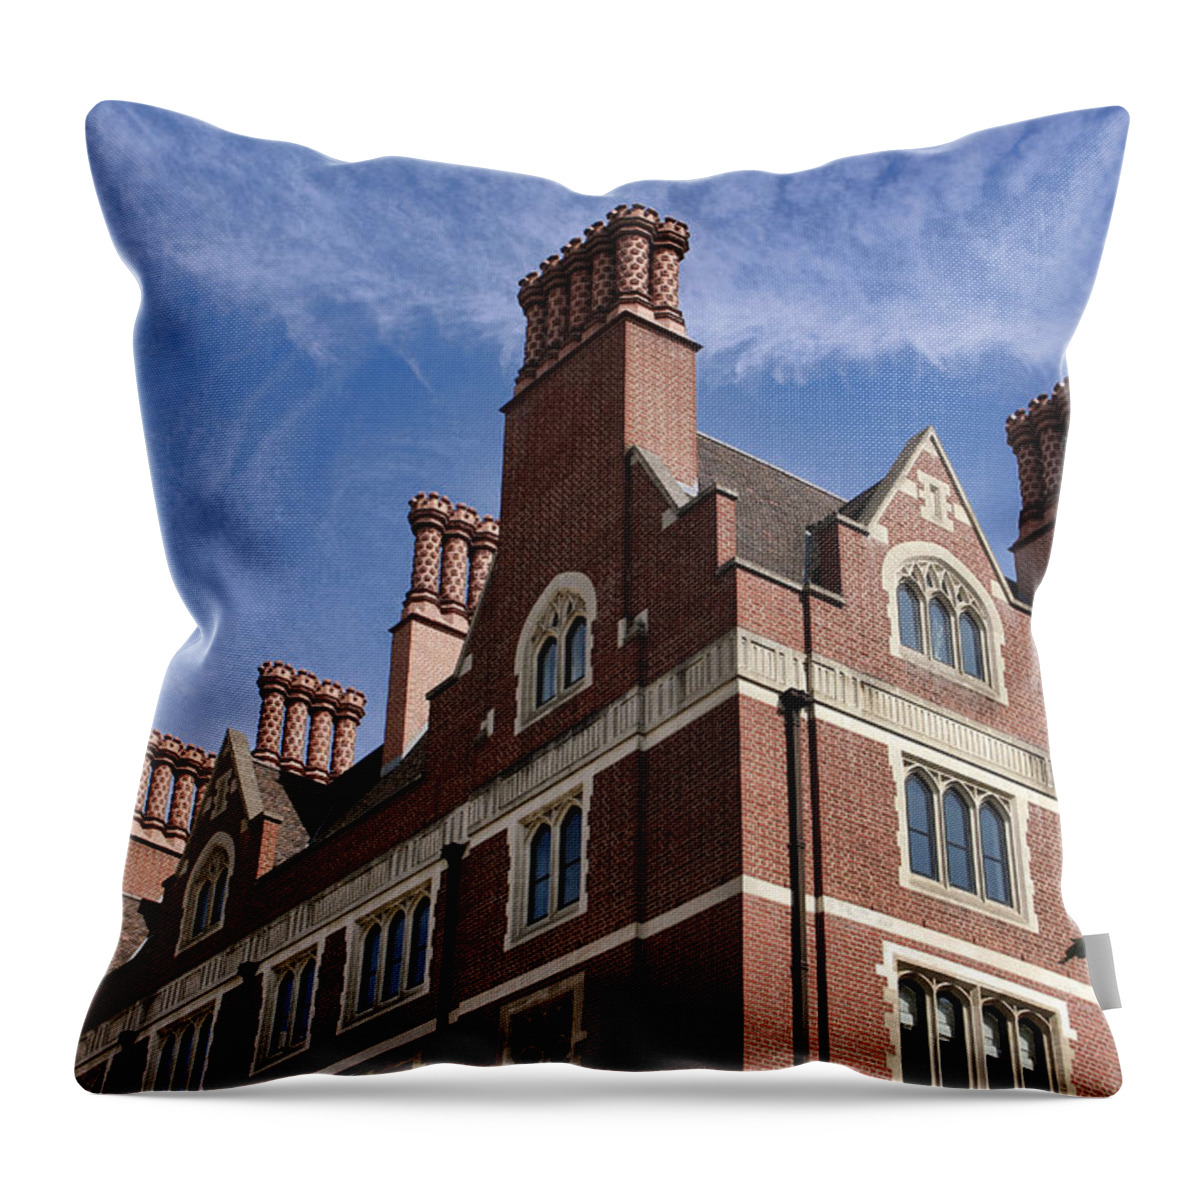 London Throw Pillow featuring the photograph Arundel House by Nicky Jameson